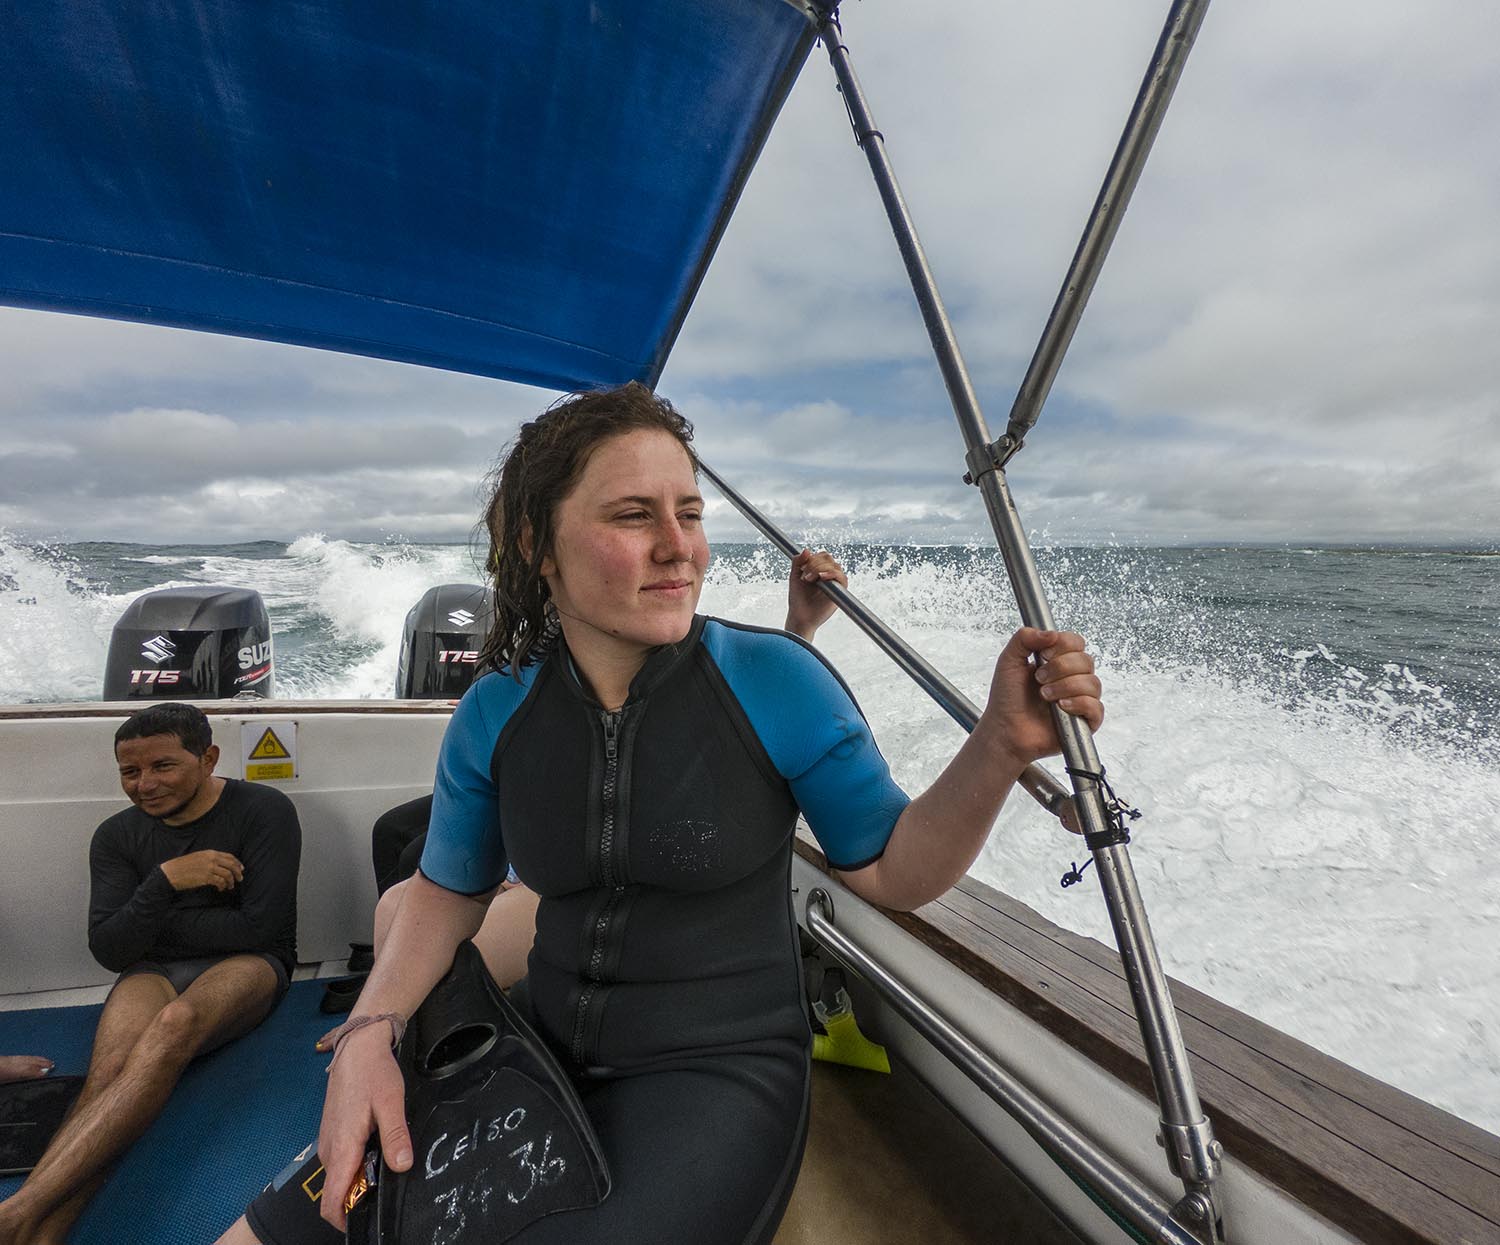 Collette Webb on a boat wearing a short sleeved wet suit